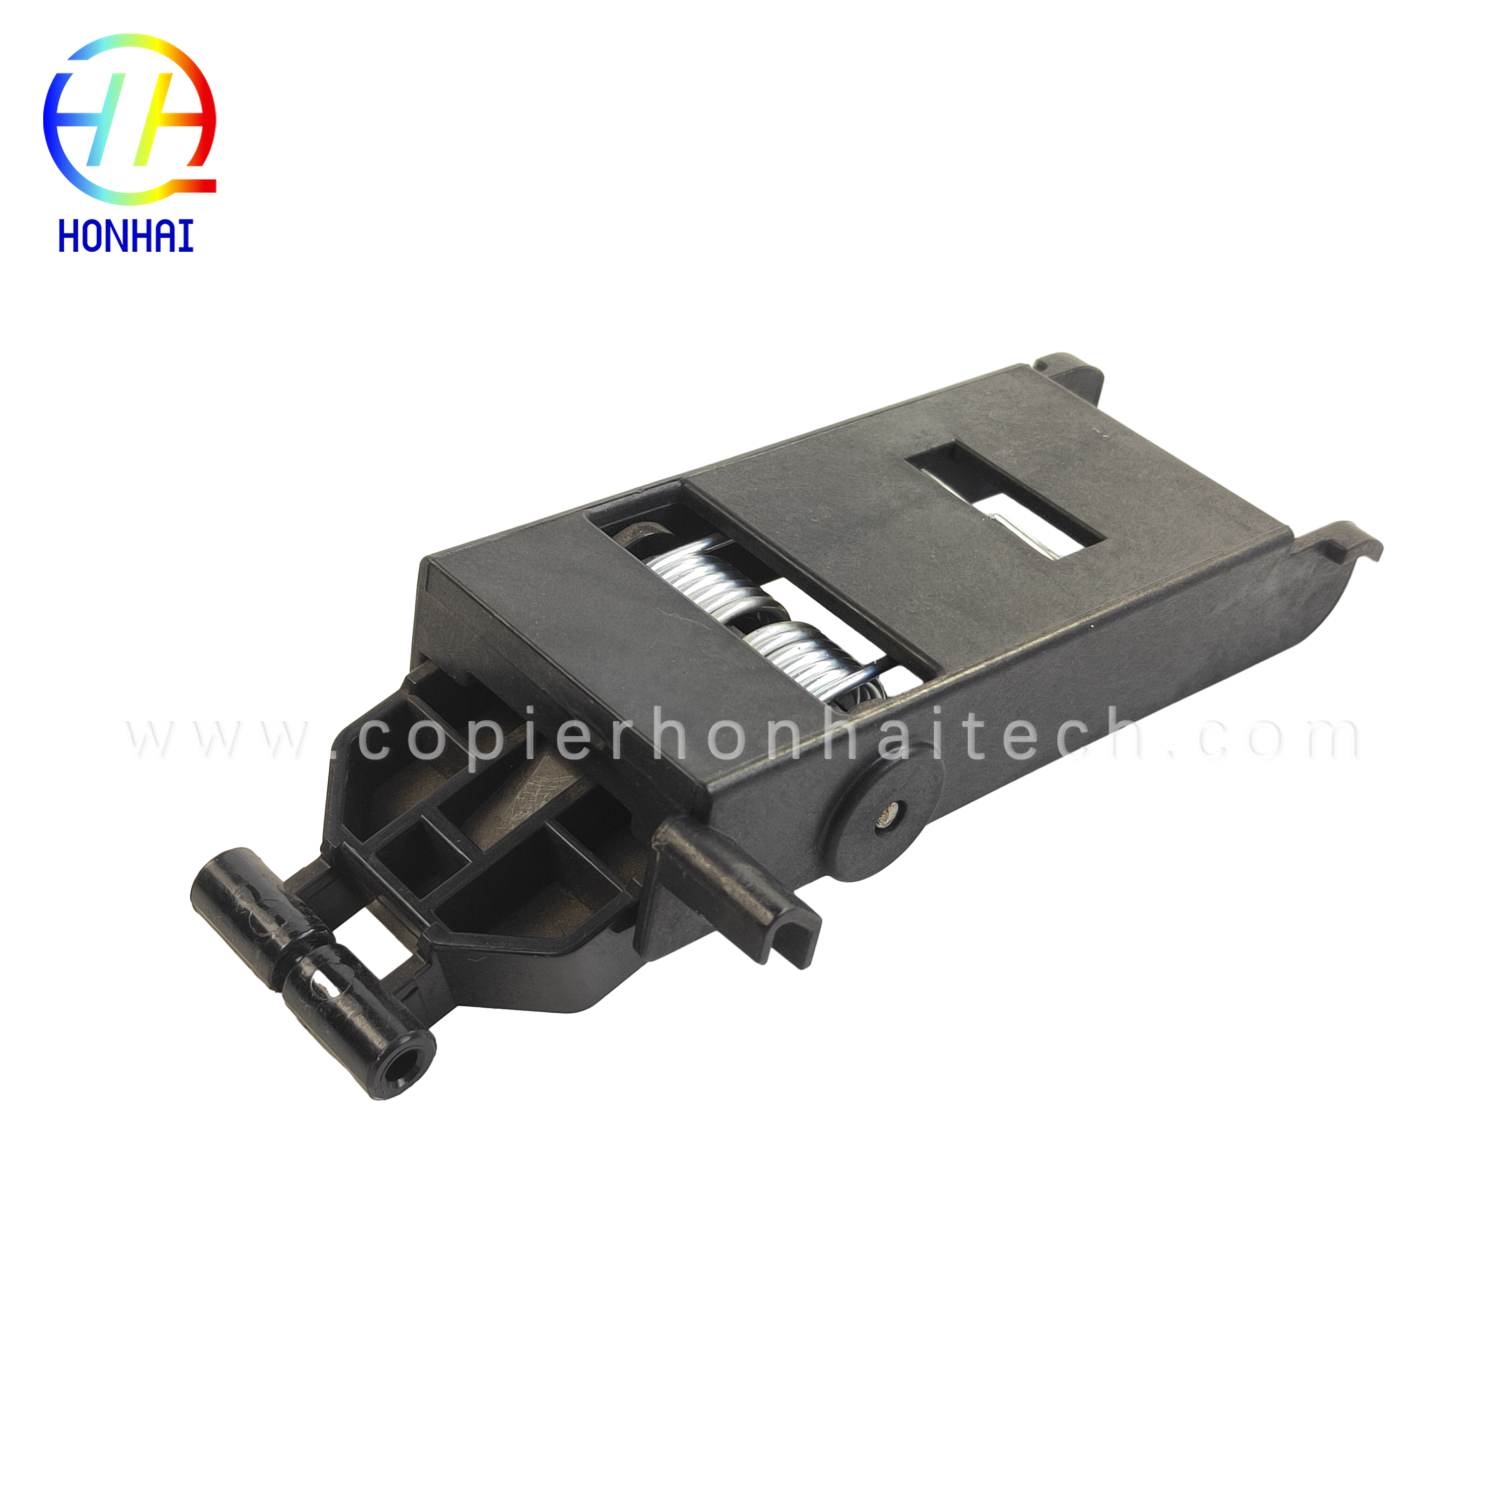 ADF-hengsel for HP M1130 M1132 M1136 M1212 M1213 M1214 CE841-60119